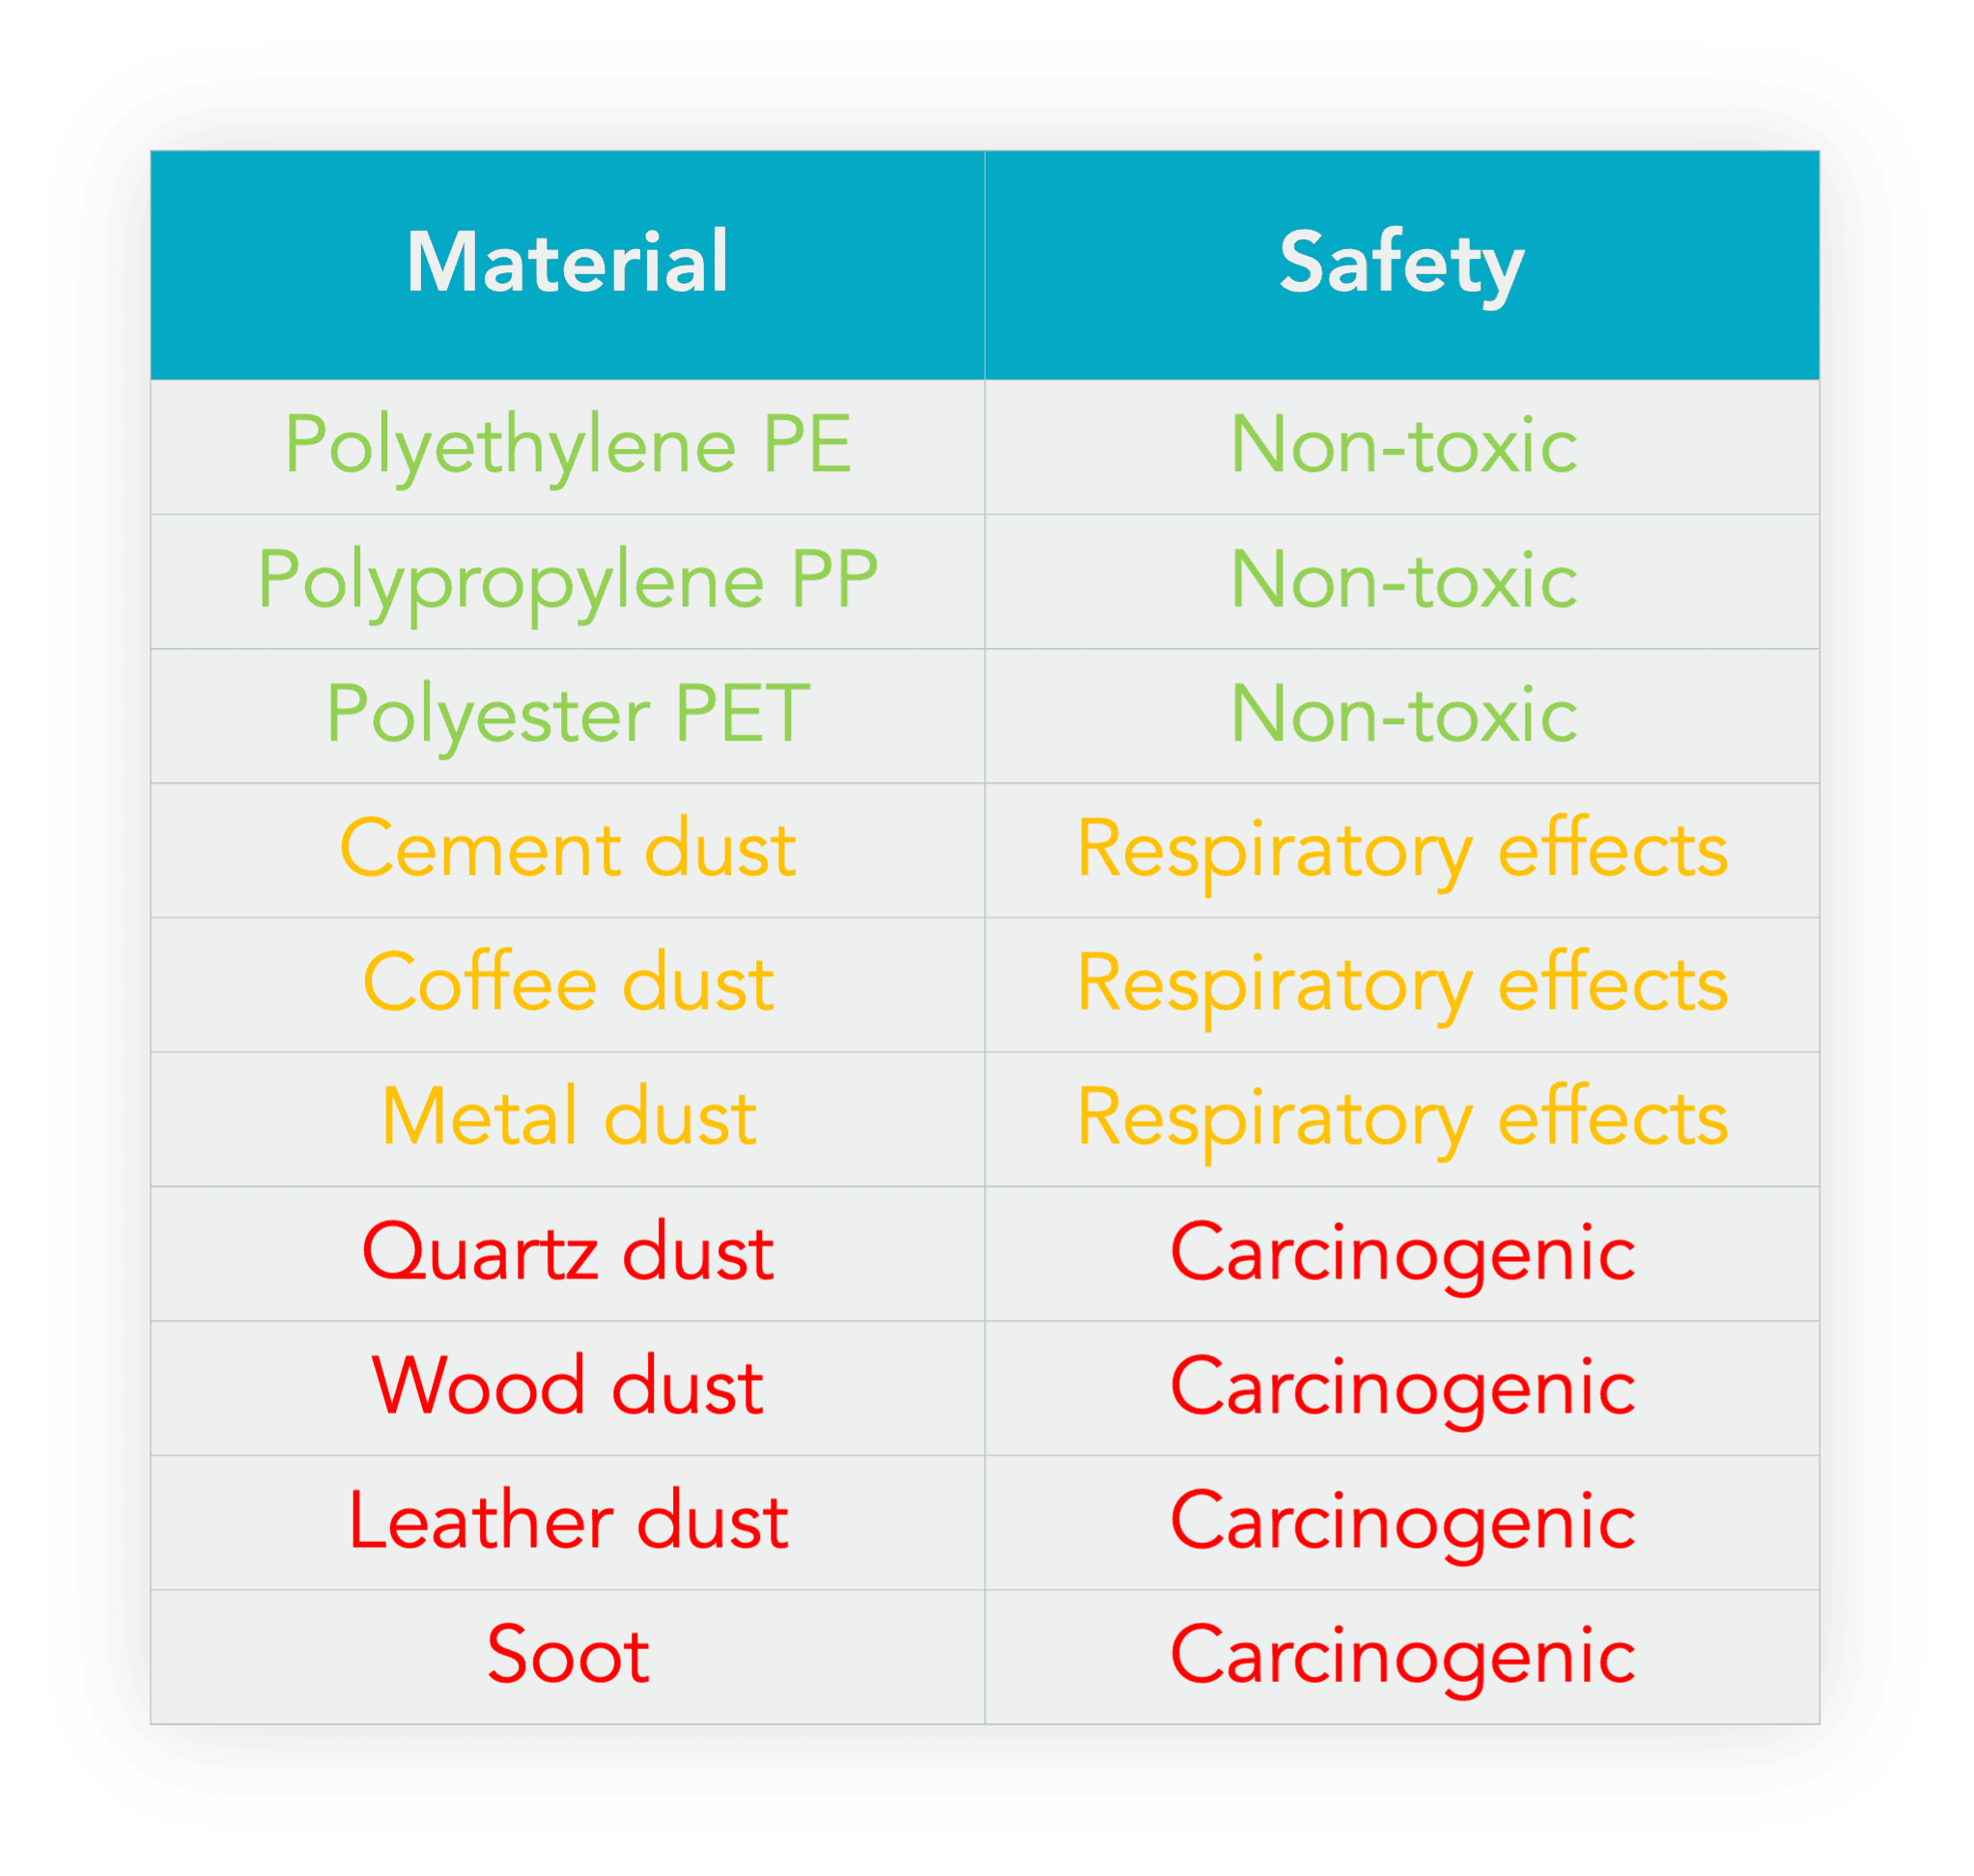 The Toxicity of Microplastics Compared to Other Types of Dust Particles